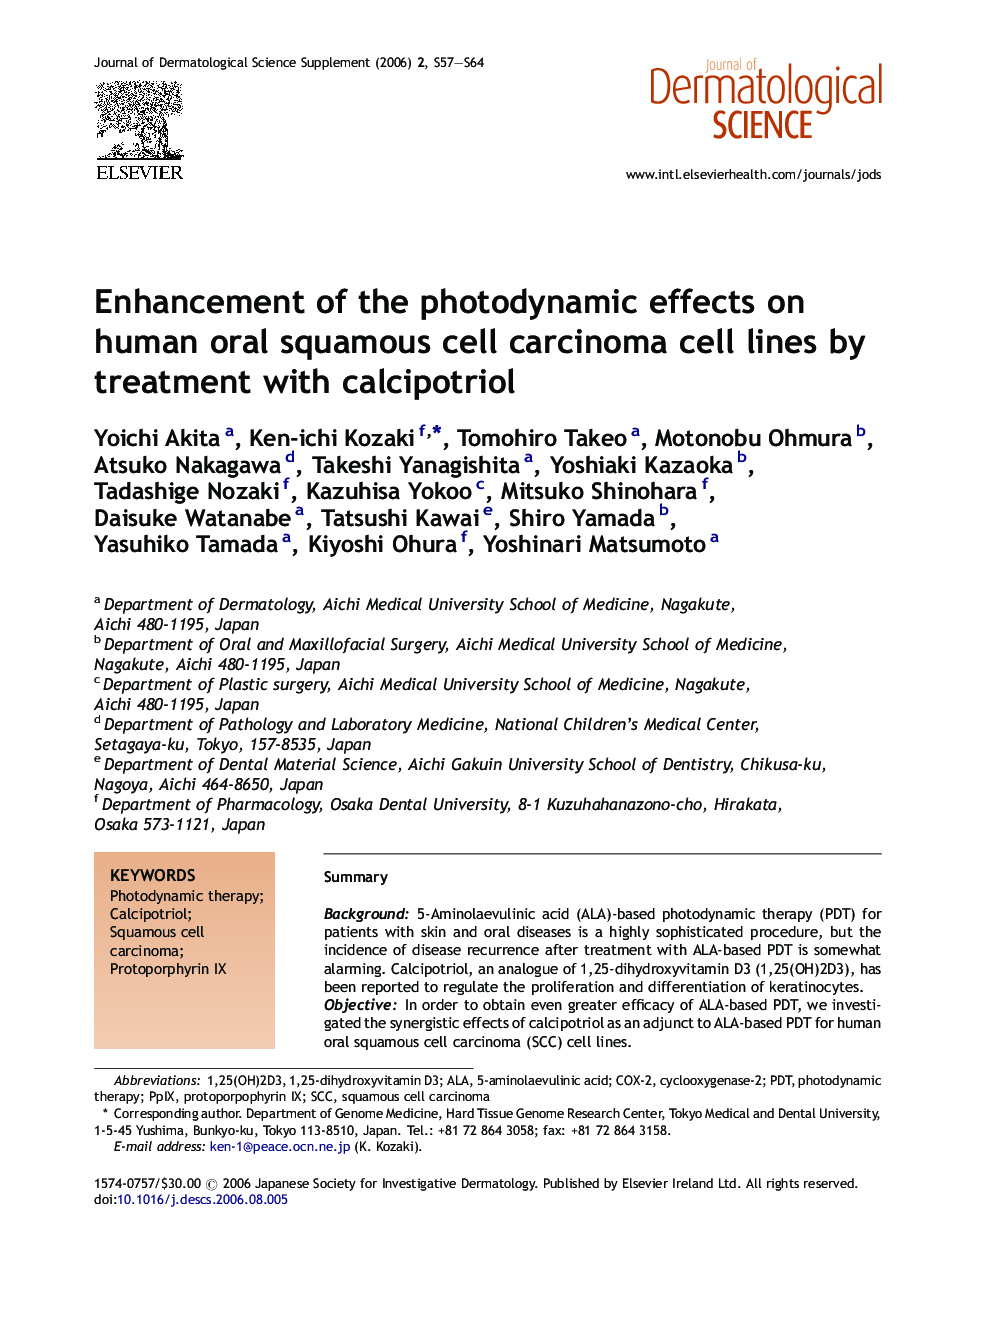 Enhancement of the photodynamic effects on human oral squamous cell carcinoma cell lines by treatment with calcipotriol